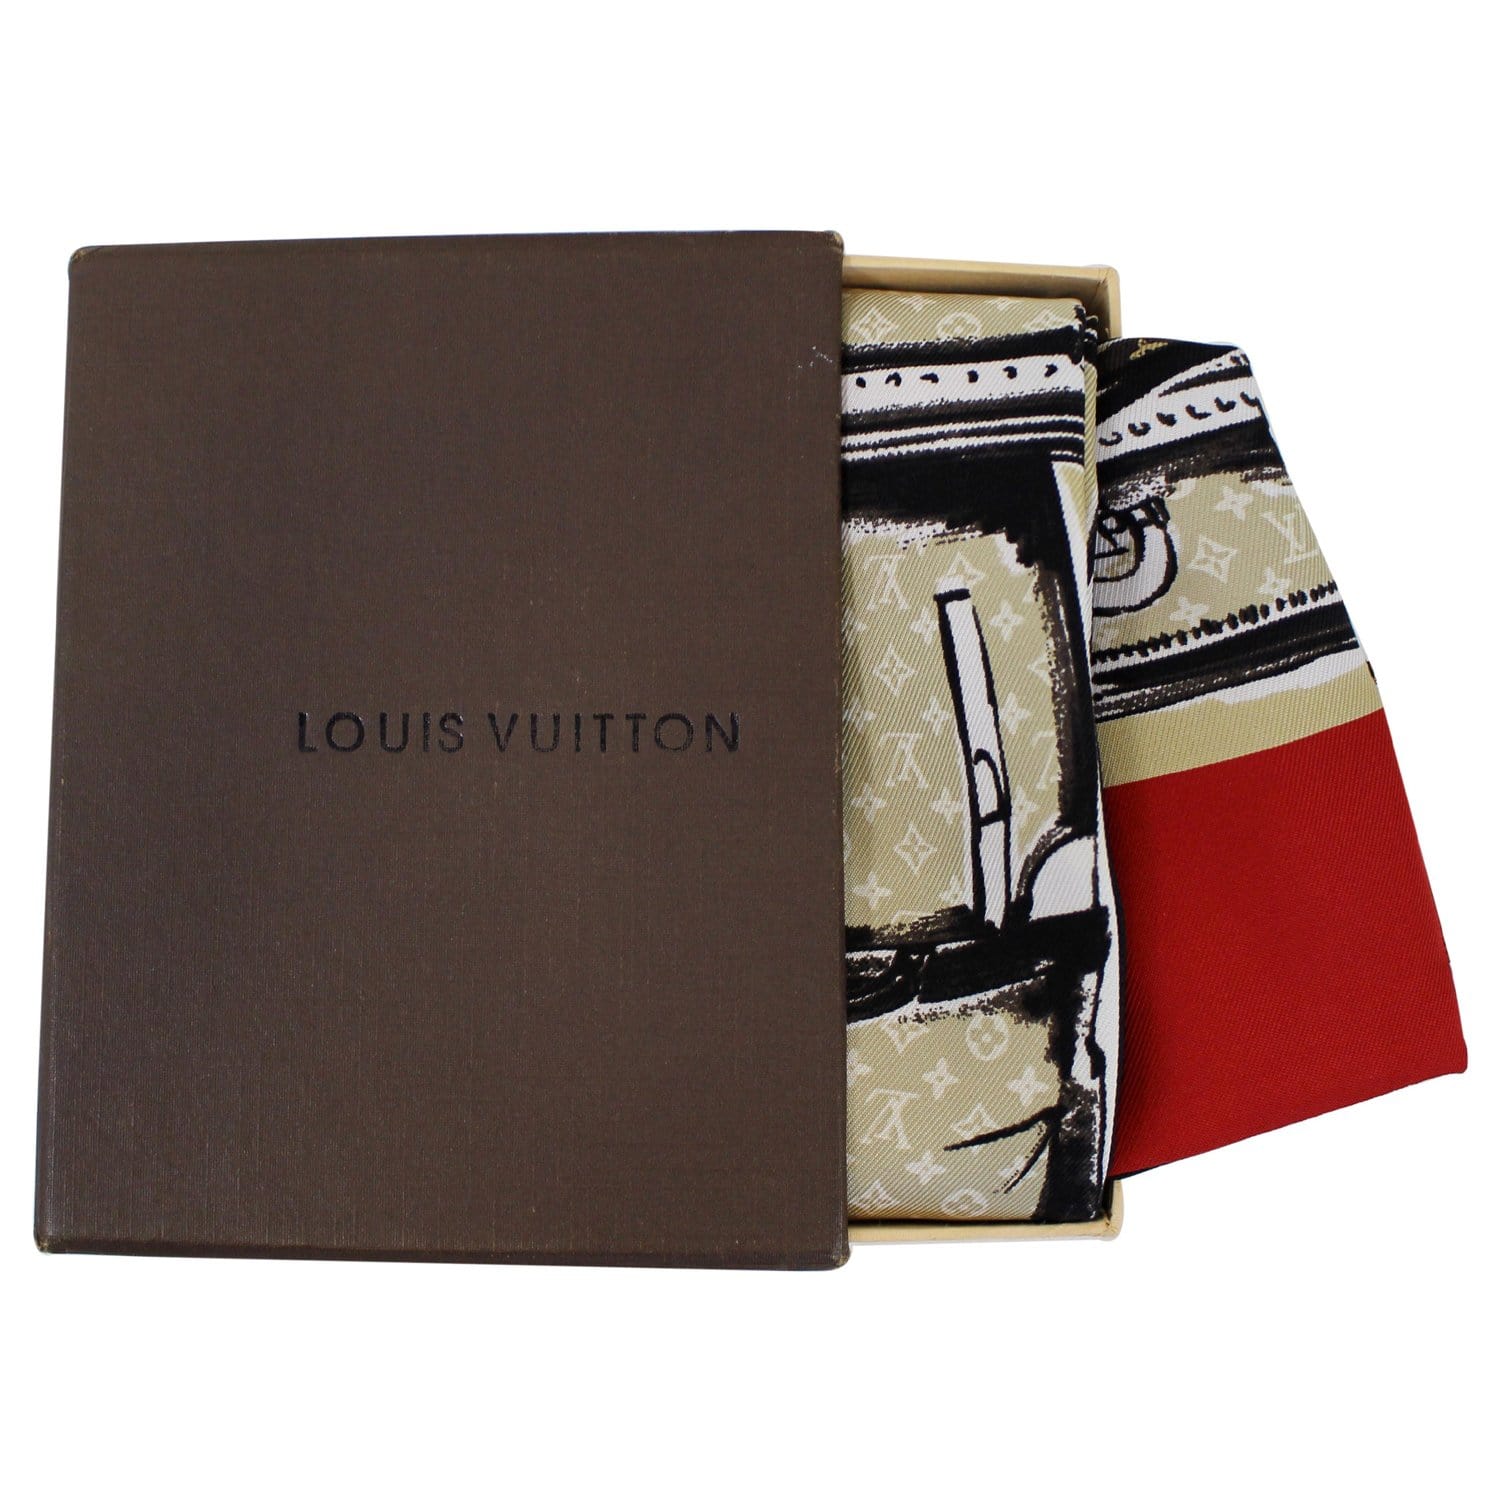 Louis Vuitton Limited Edition Silk Scarf with Box